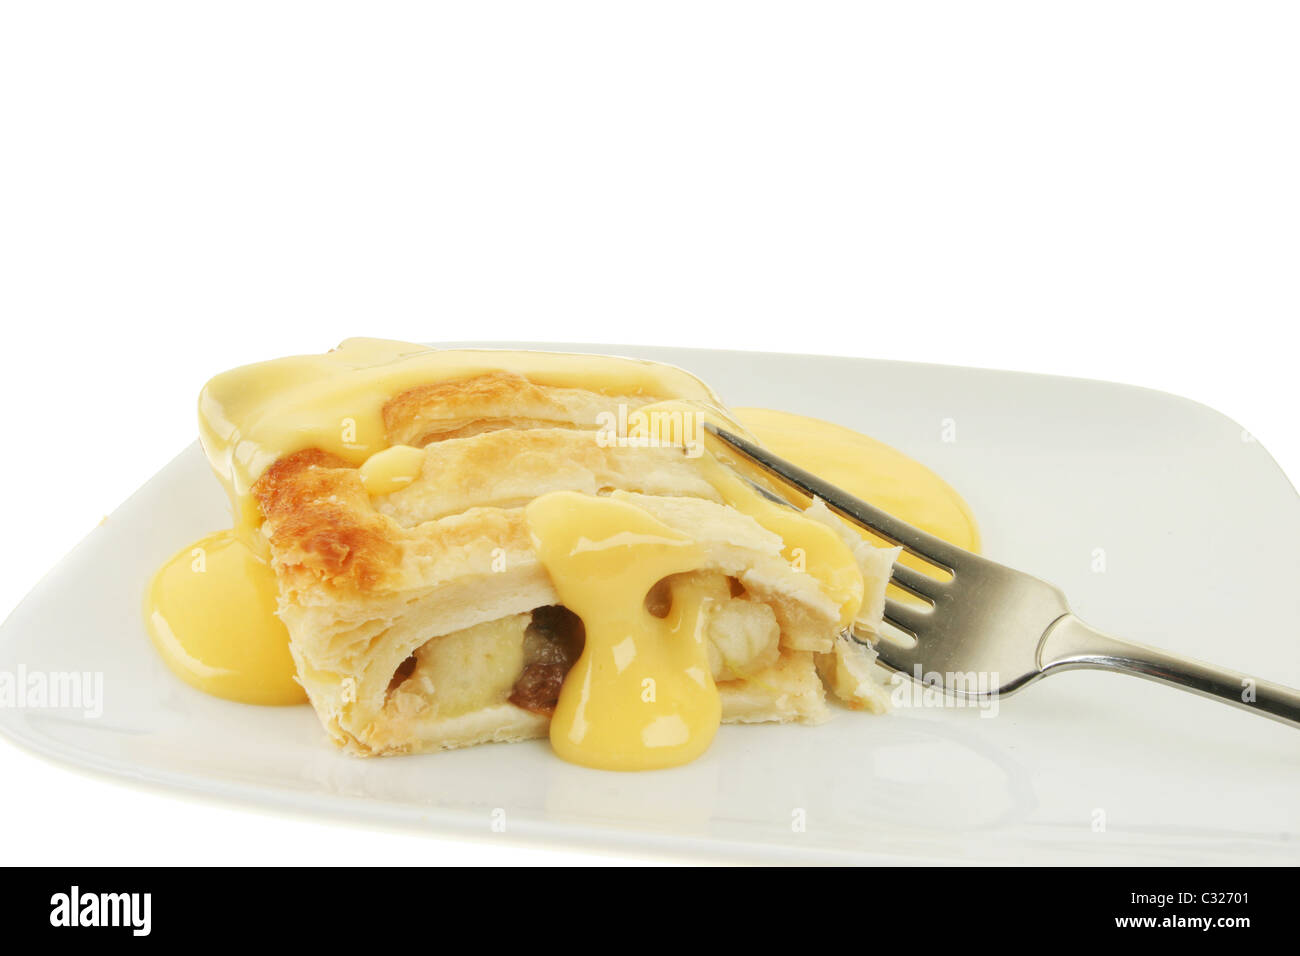 Apple strudel and custard with a fork on a plate Stock Photo